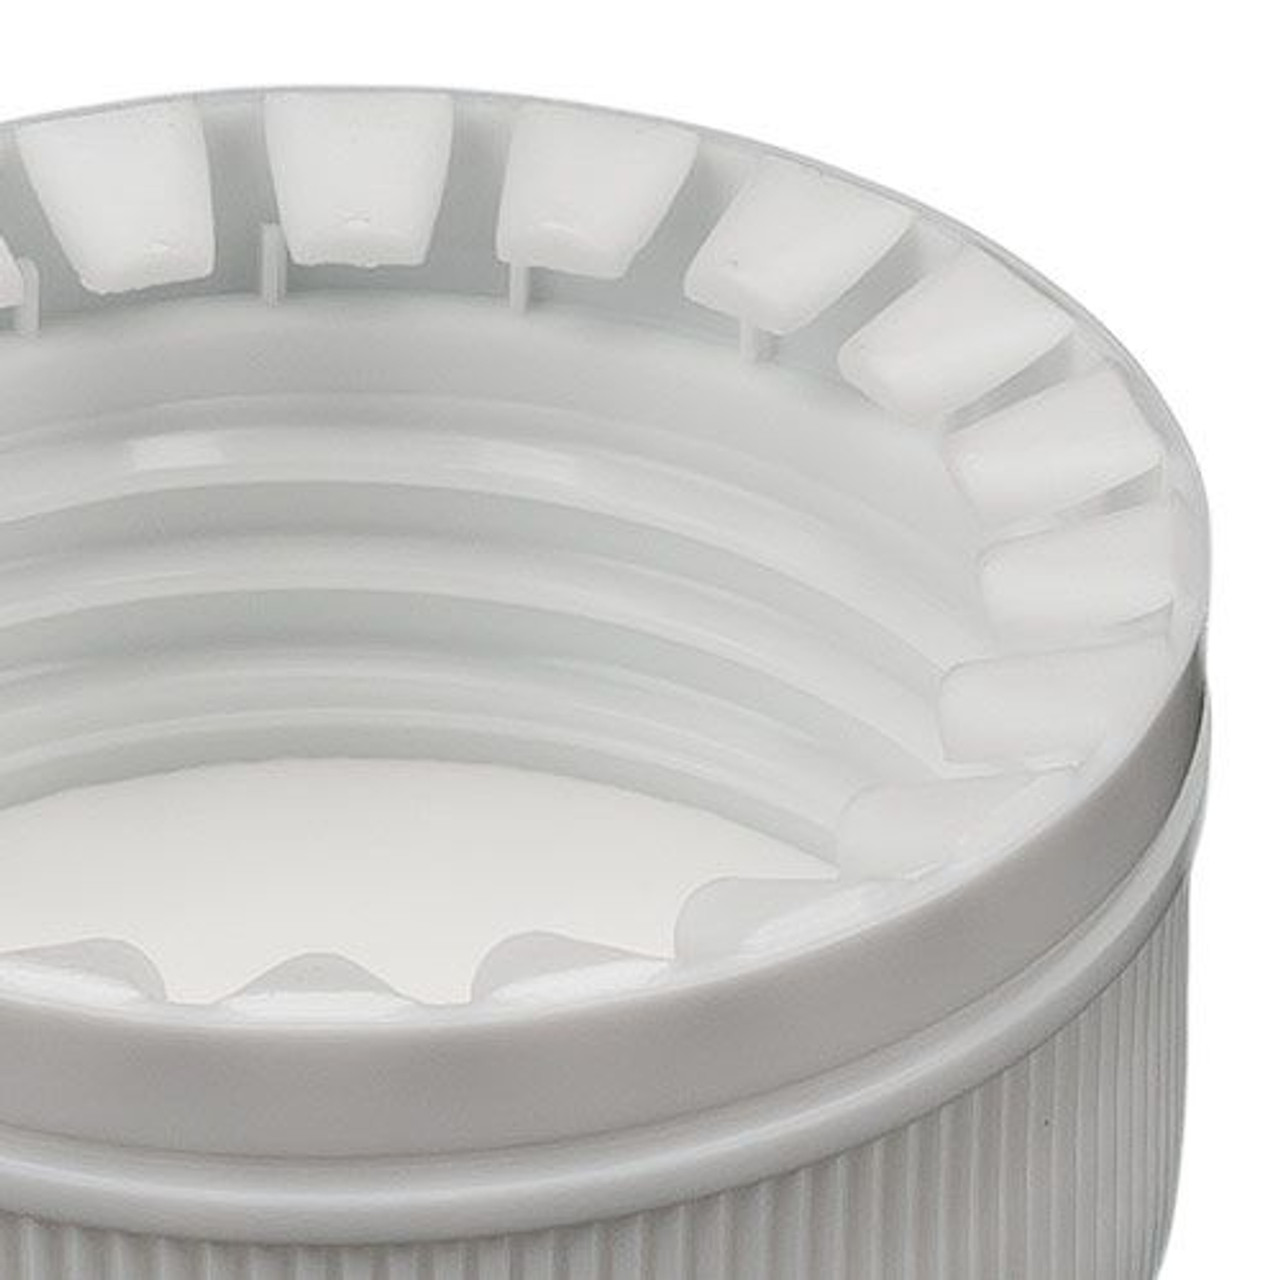 French Countryside White Plastic Replacement Cap - Tamper-Evident, Fits 10  oz Square Bottle - 1 3/4 x 1 3/4 x 3/4 - 10 count box